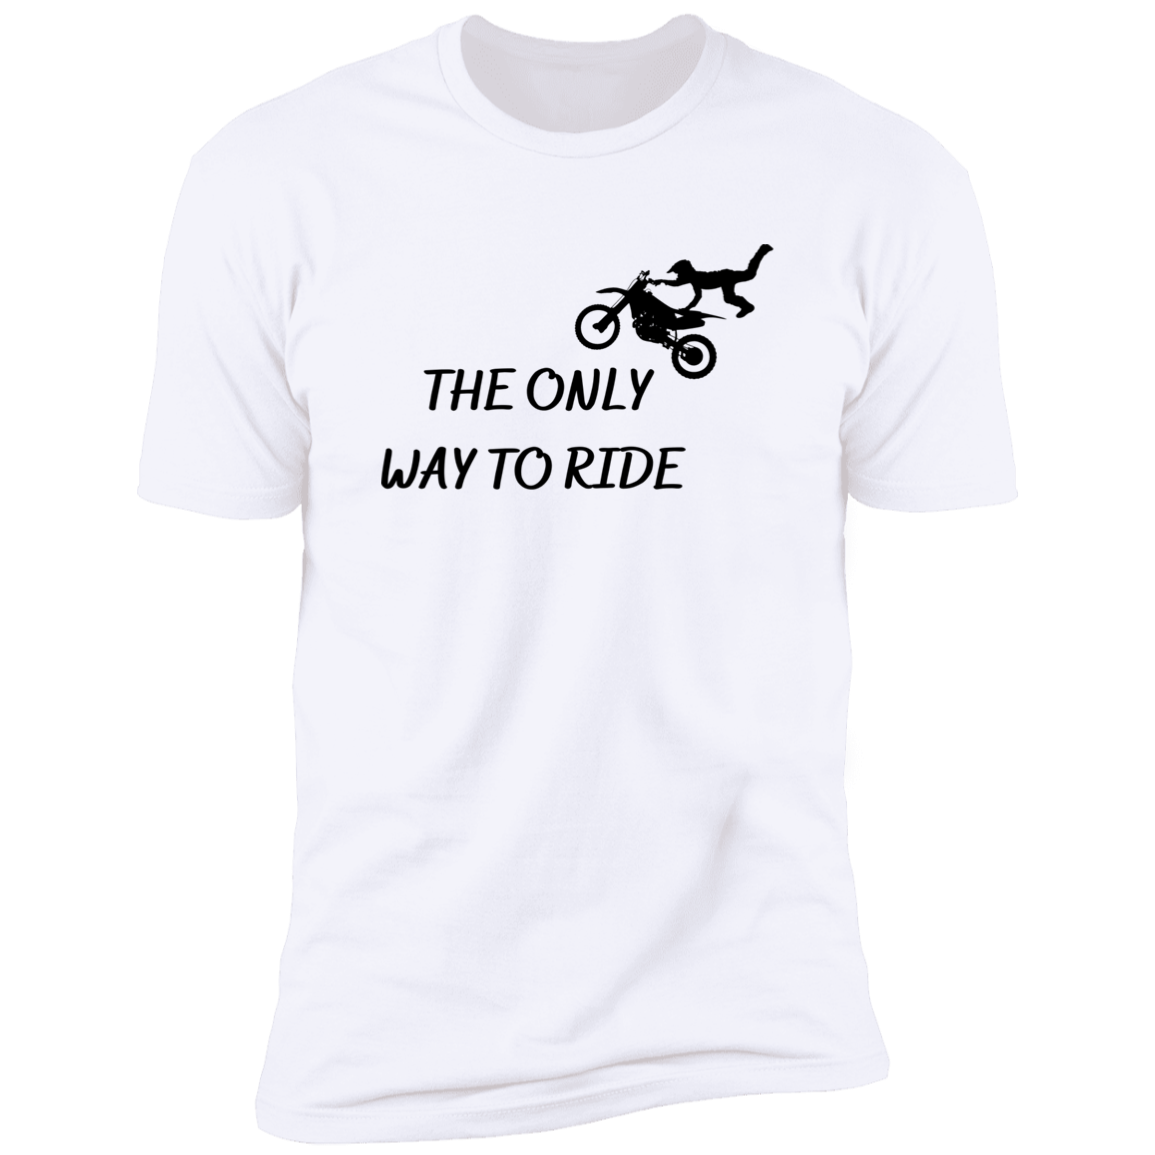 The Only Way To Ride / Extreme Softness /Premium Short Sleeve Tee